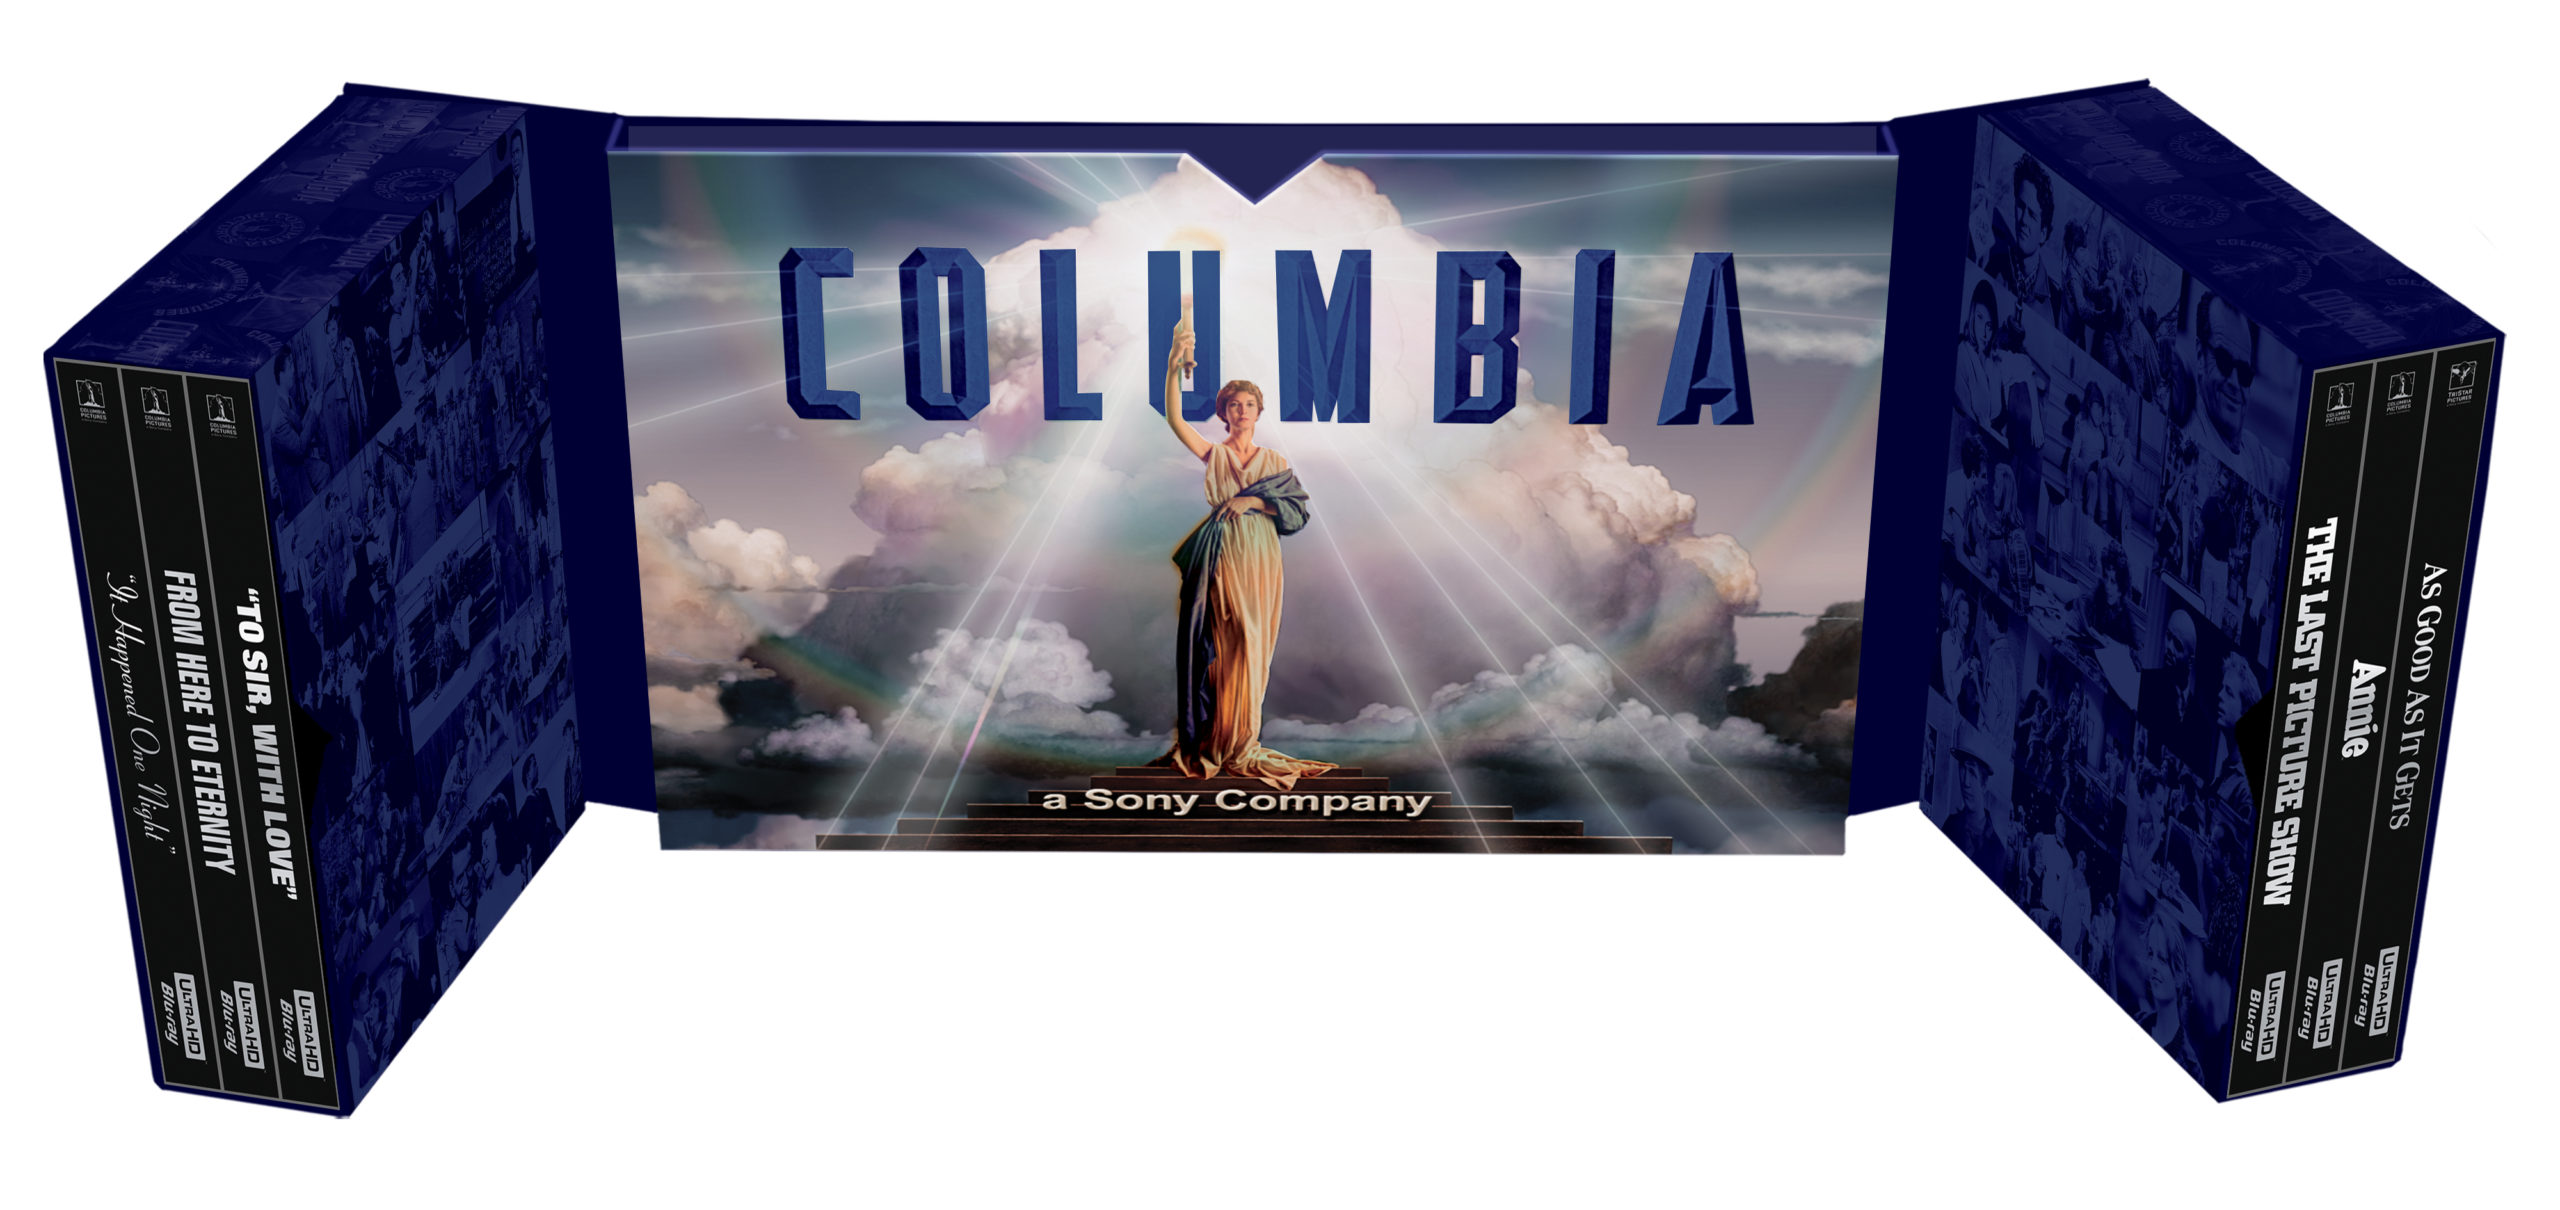 Six Landmark Films from the Columbia Pictures Library Debut on 4K